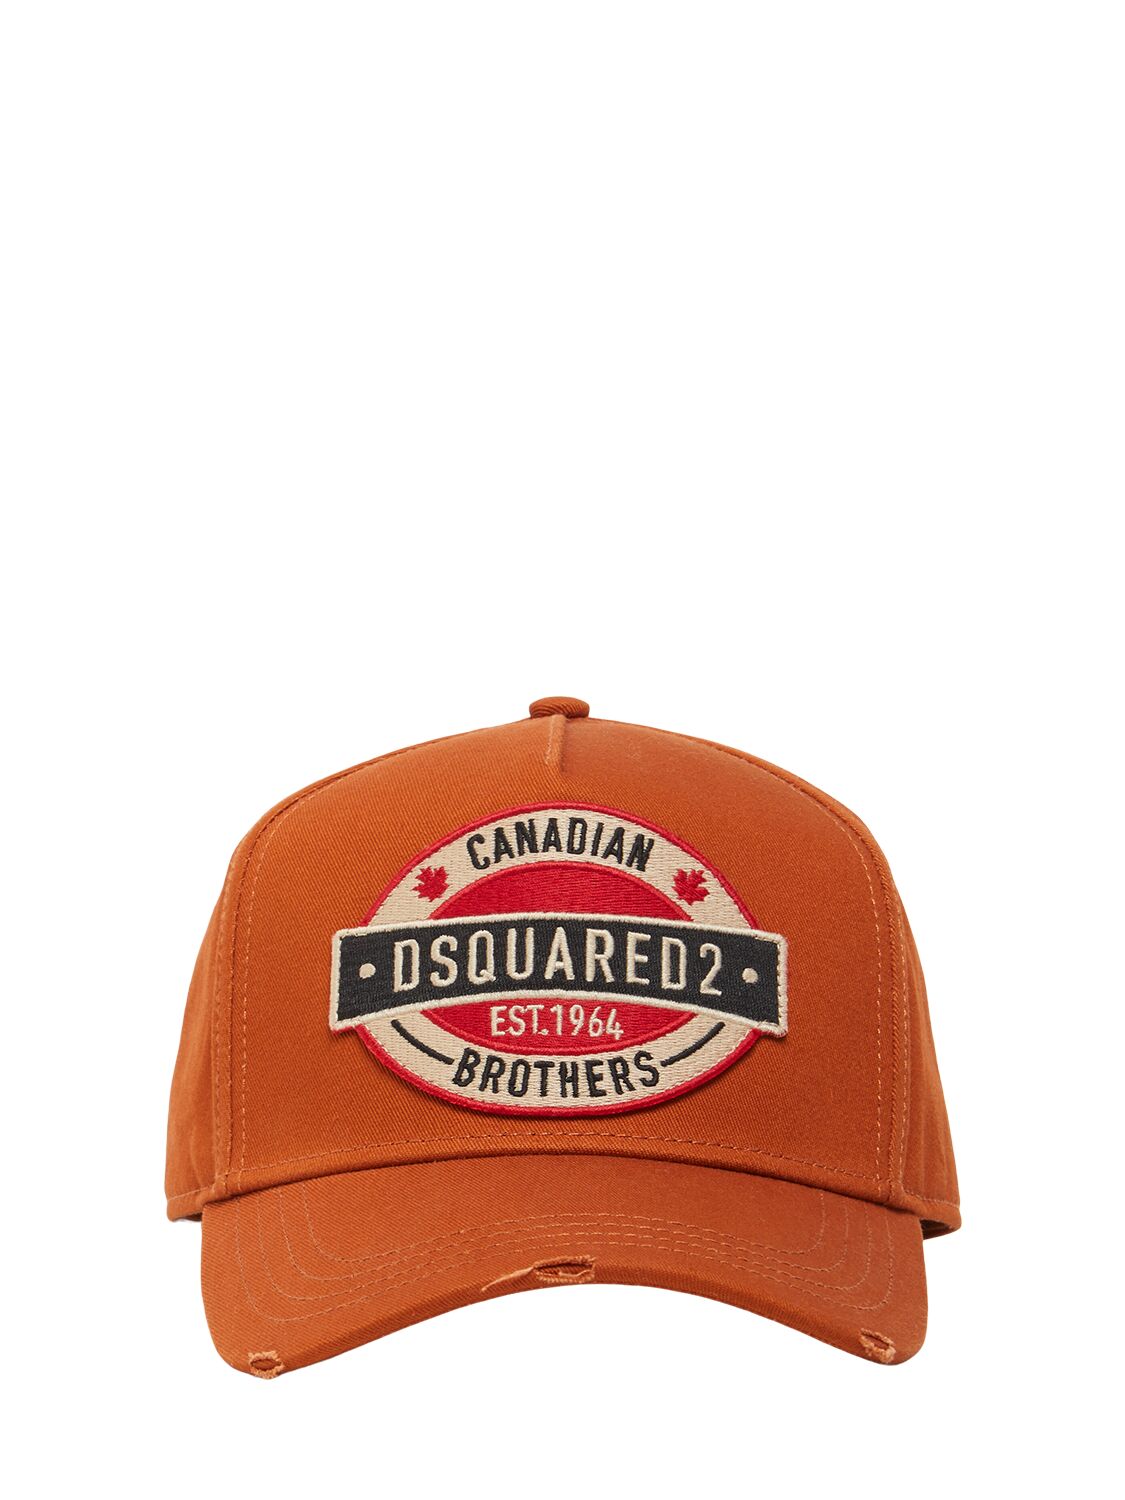 Dsquared2 Canadian Brothers Cotton Baseball Hat In Brown